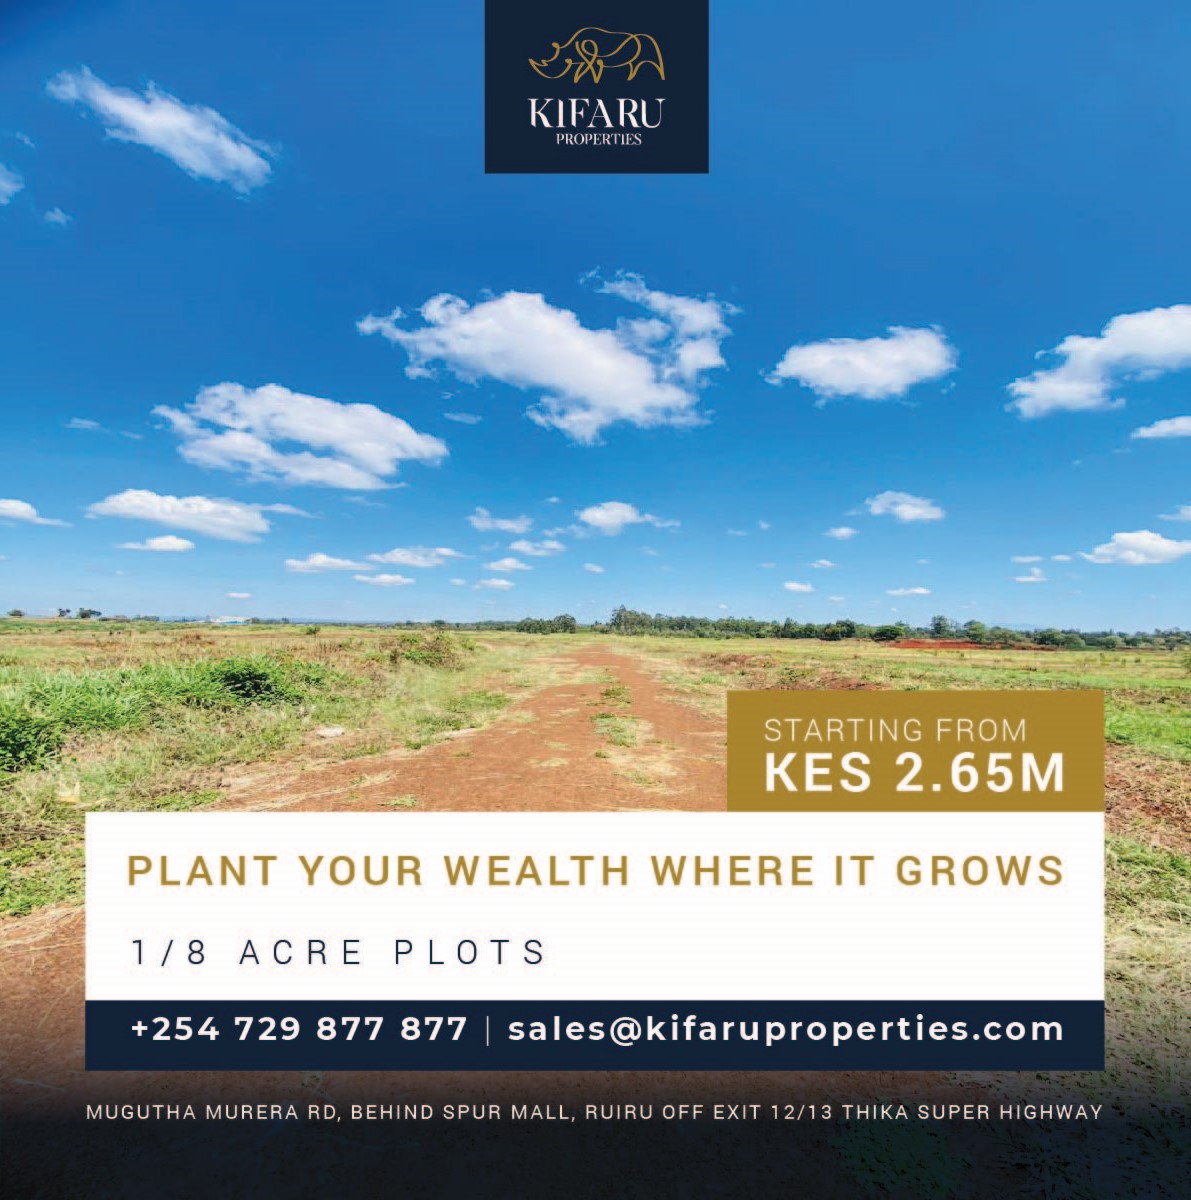 Don't wait to invest in land, invest in land then wait.

Call us on 0729877877 for more details.

#kifaruproperties #Ruiru #ResidentialPlots #primeplots #investinland #investinyourfuture #realestate